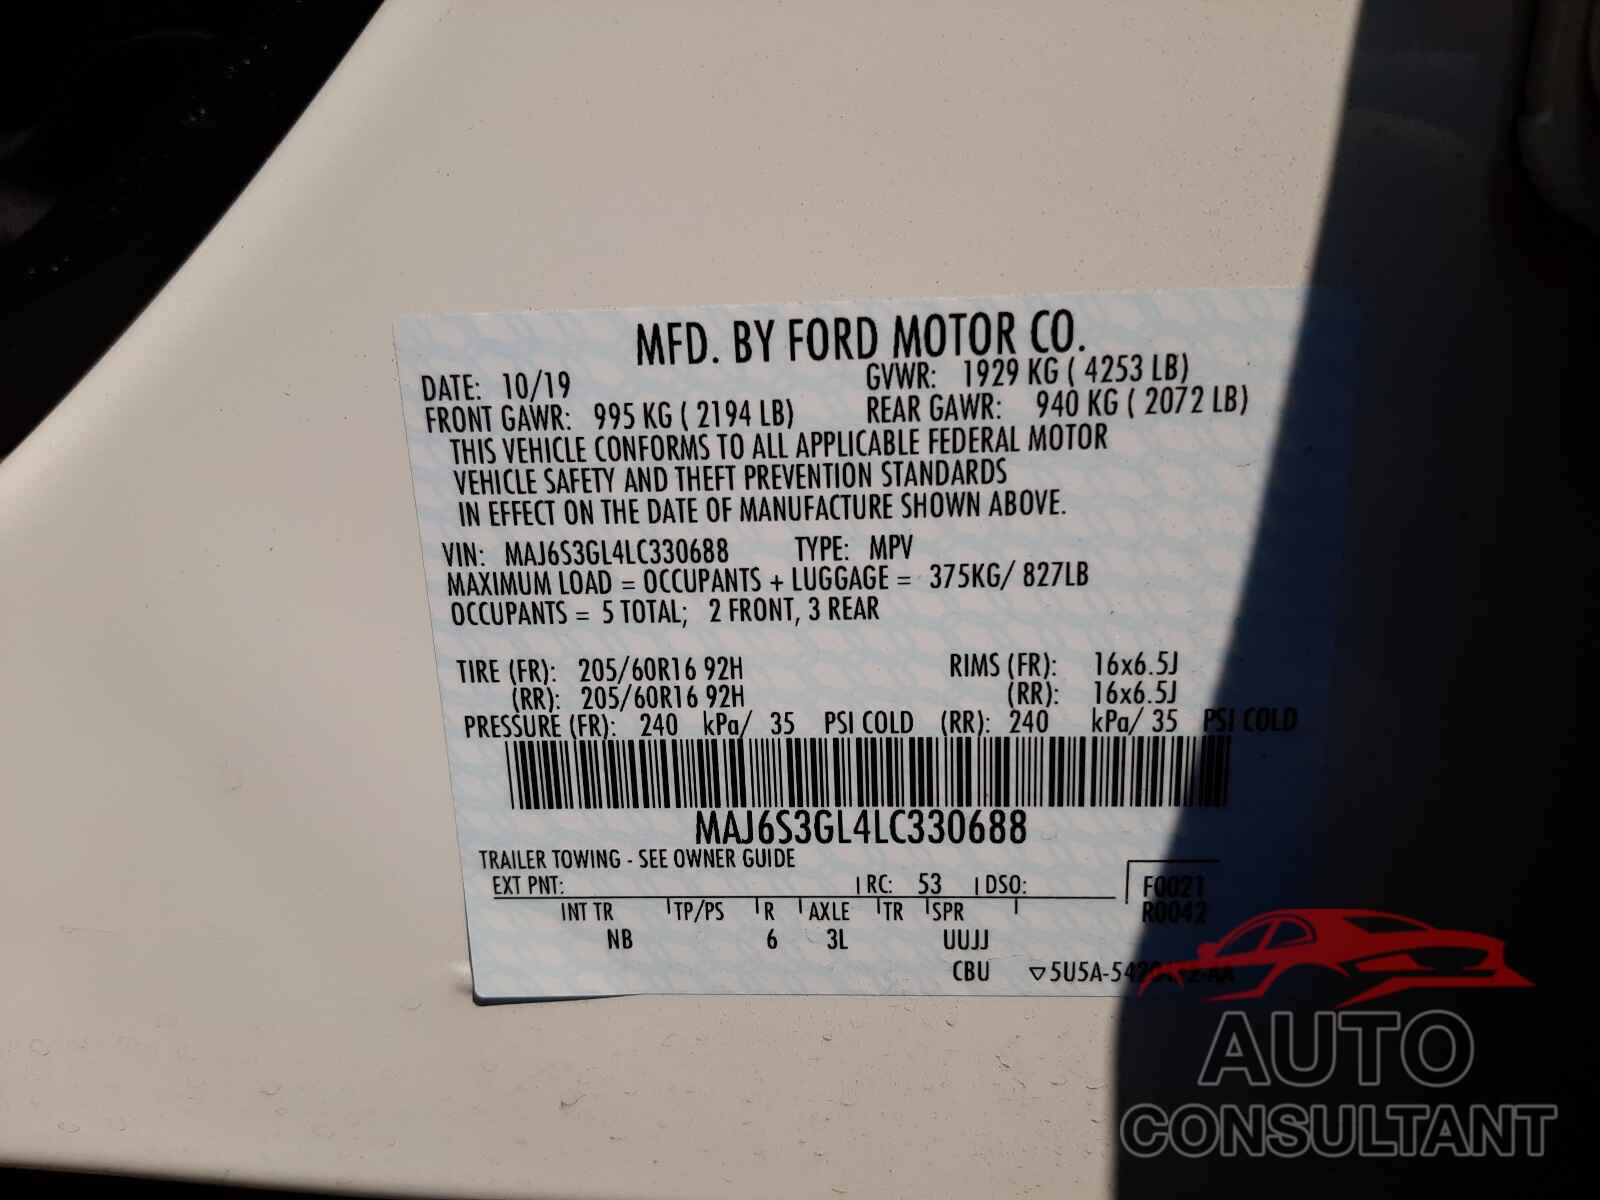 FORD ALL OTHER 2020 - MAJ6S3GL4LC330688